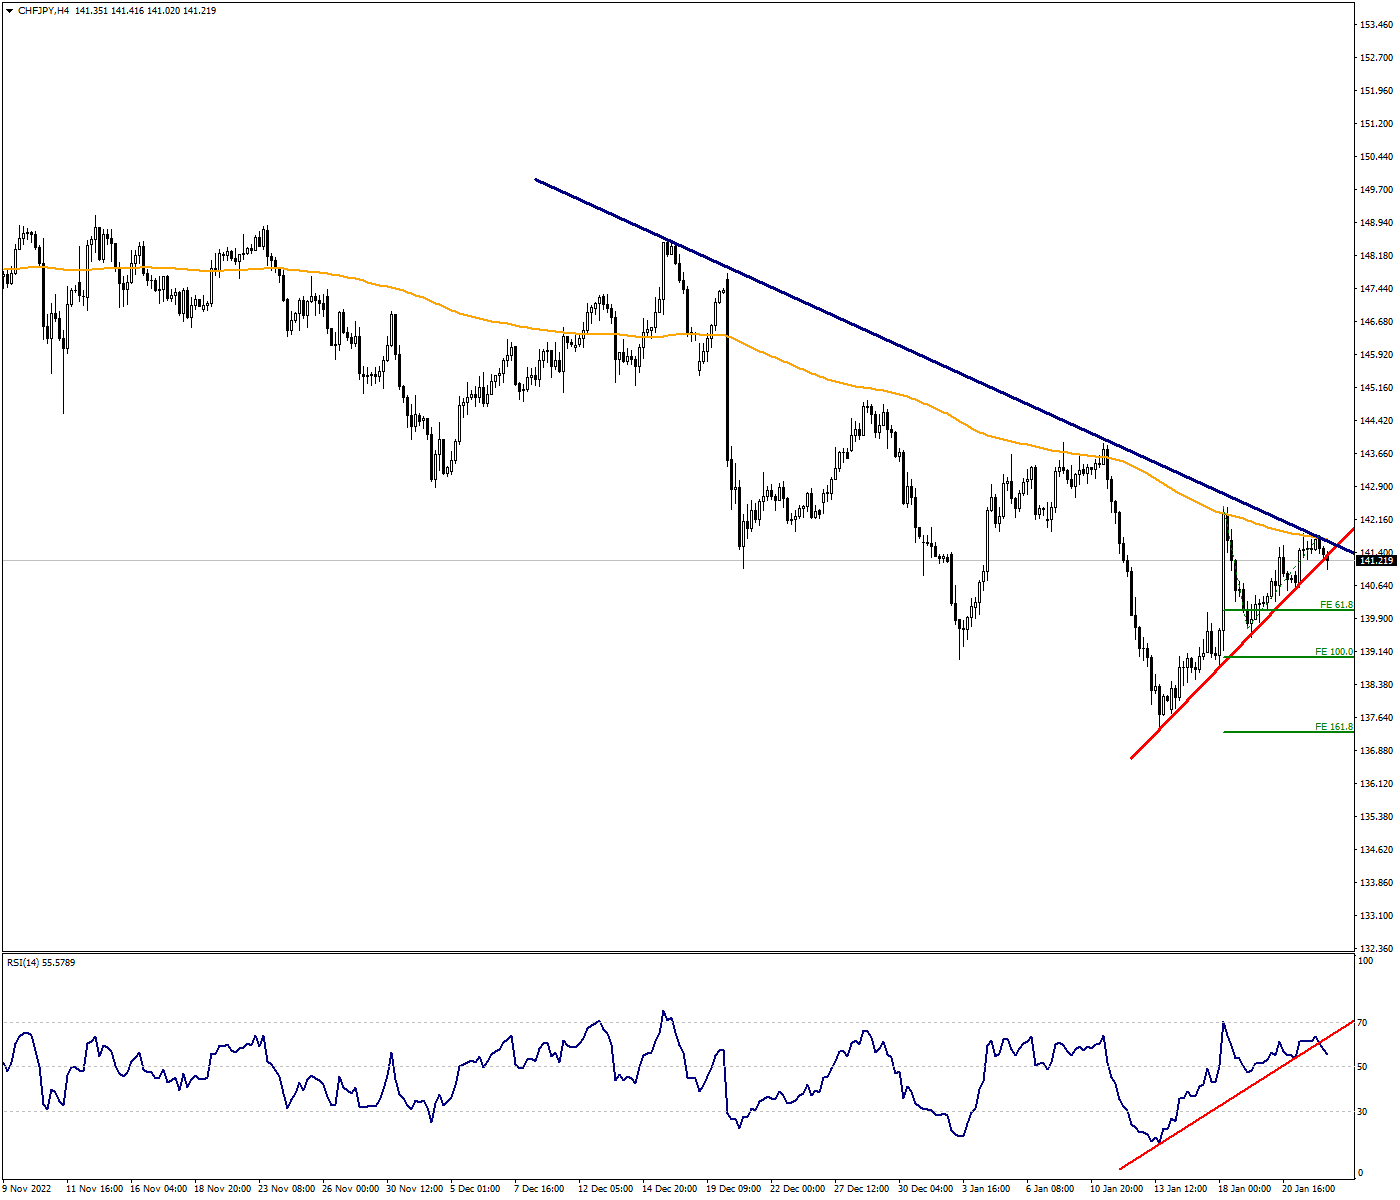 CHFJPY Confirms its Downtrend